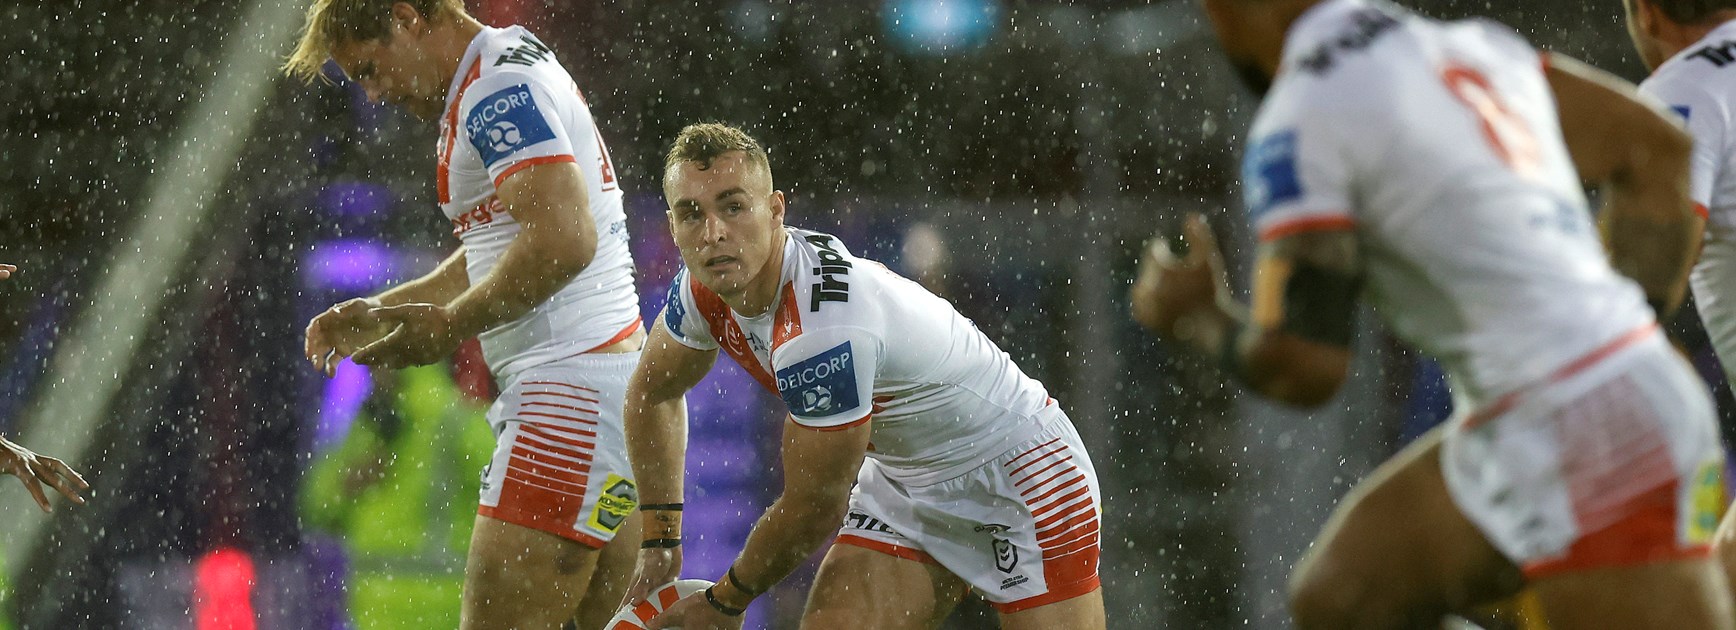 Knights overcome Dragons in wet conditions